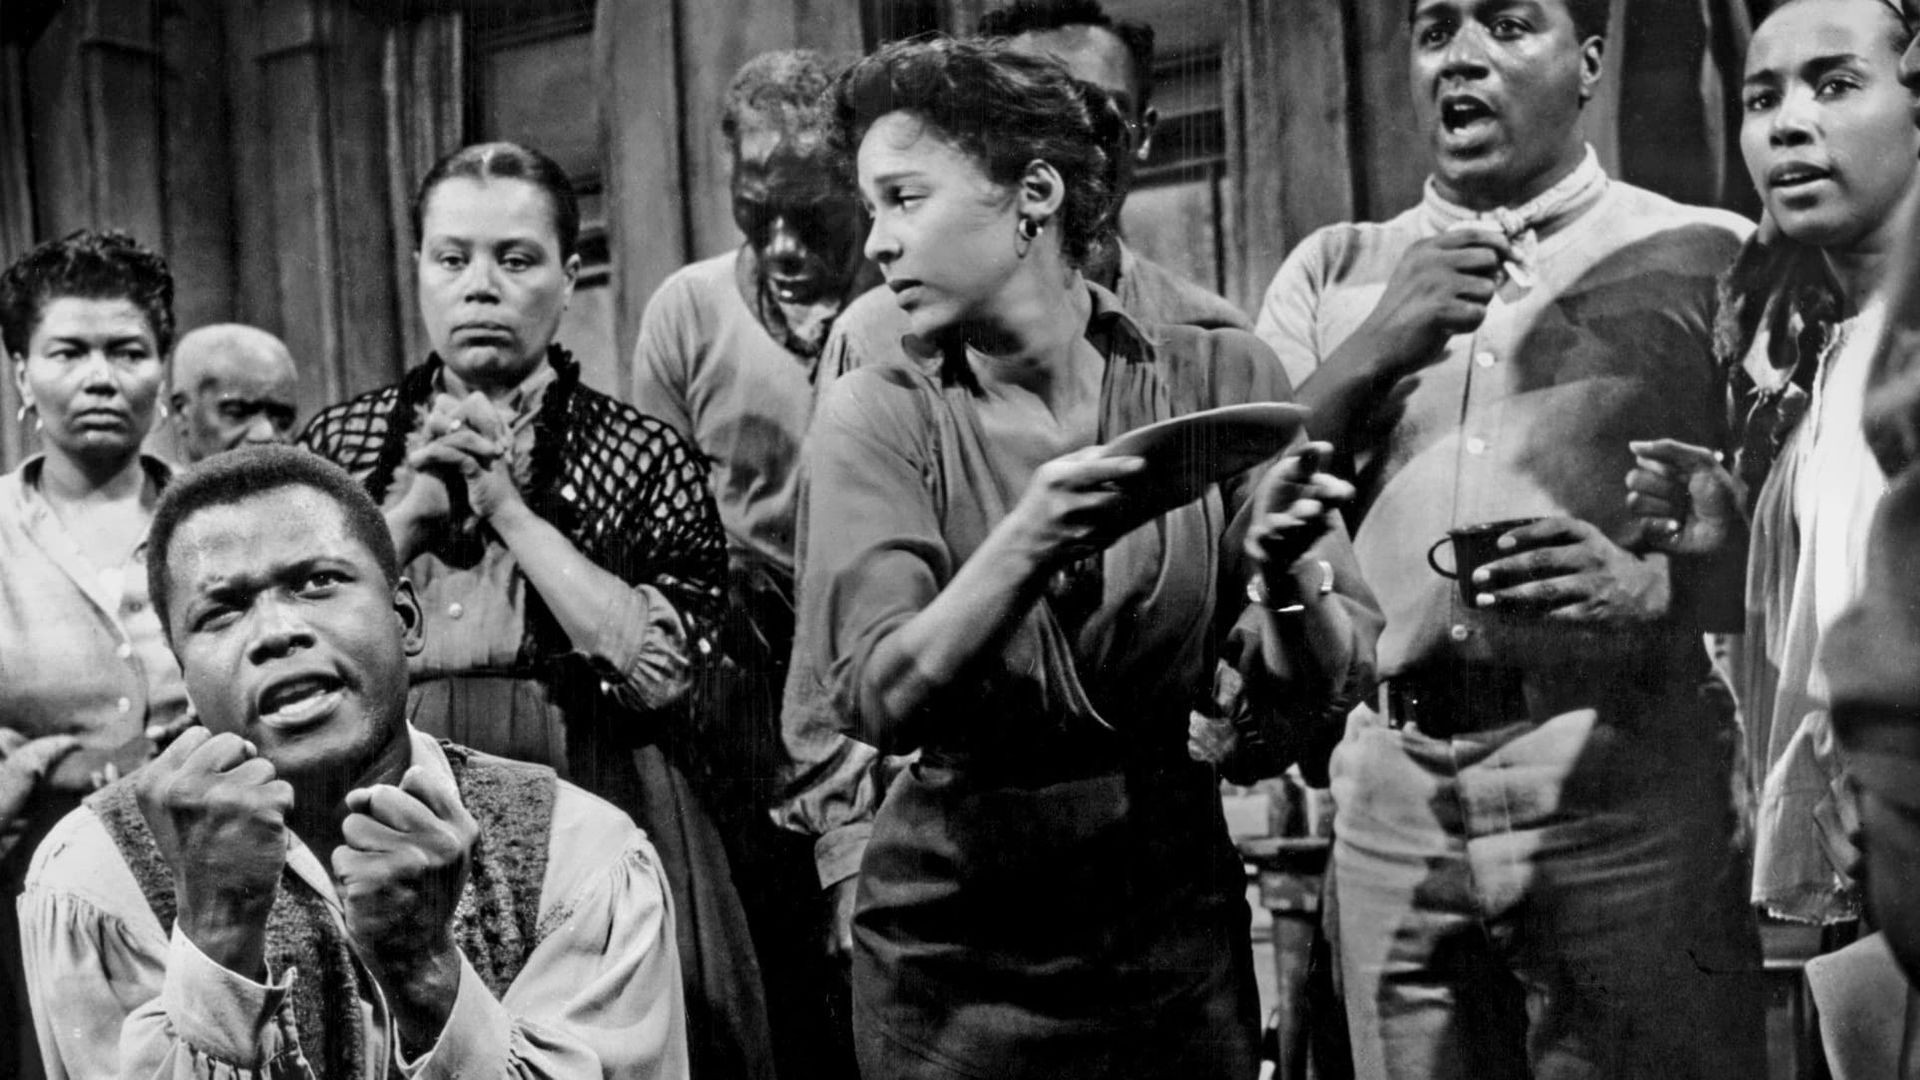 Porgy and Bess background